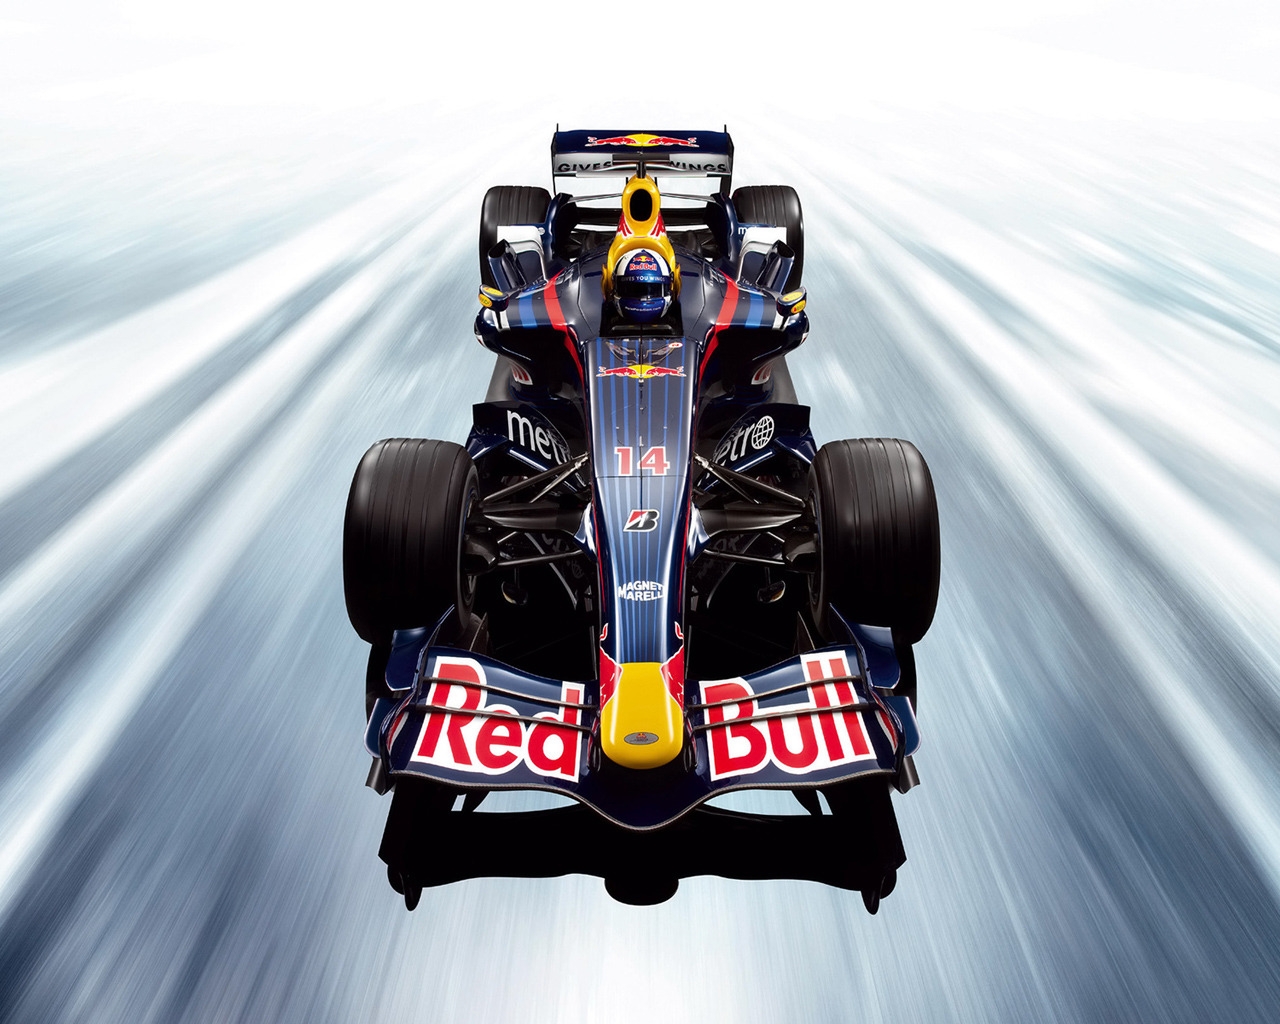 Red Bull RB3 F1 Studio Front for 1280 x 1024 resolution